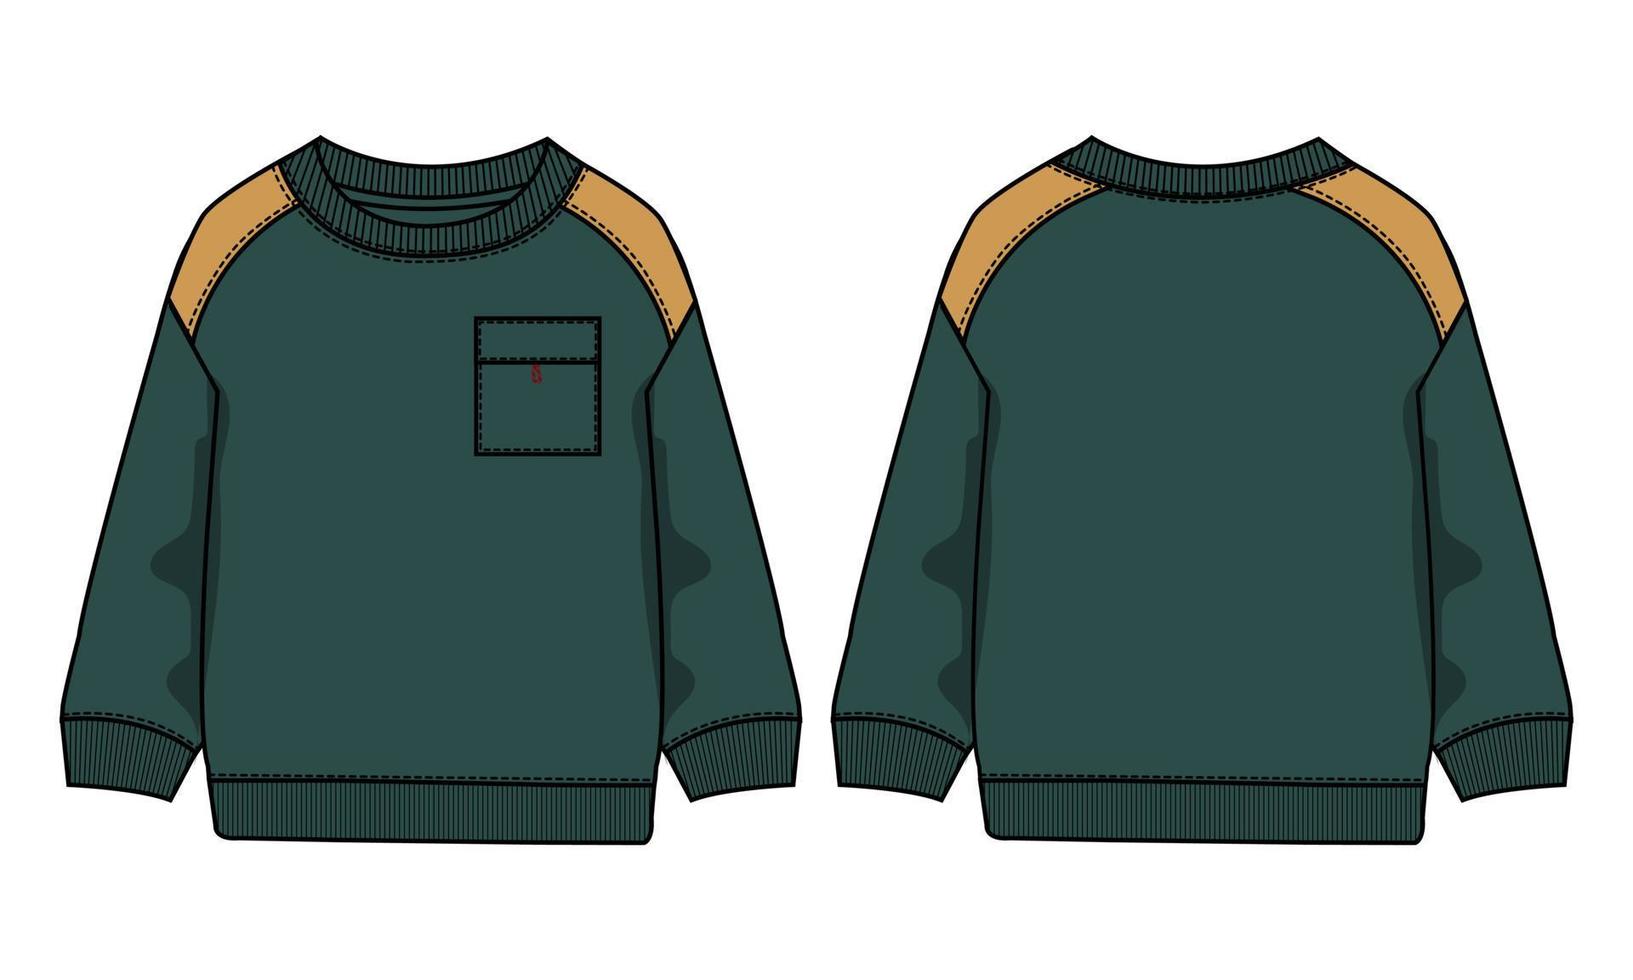 Long sleeve Sweatshirt with pocket Technical Fashion flat sketch vector illustration Green Color template front and back views isolated on white background.